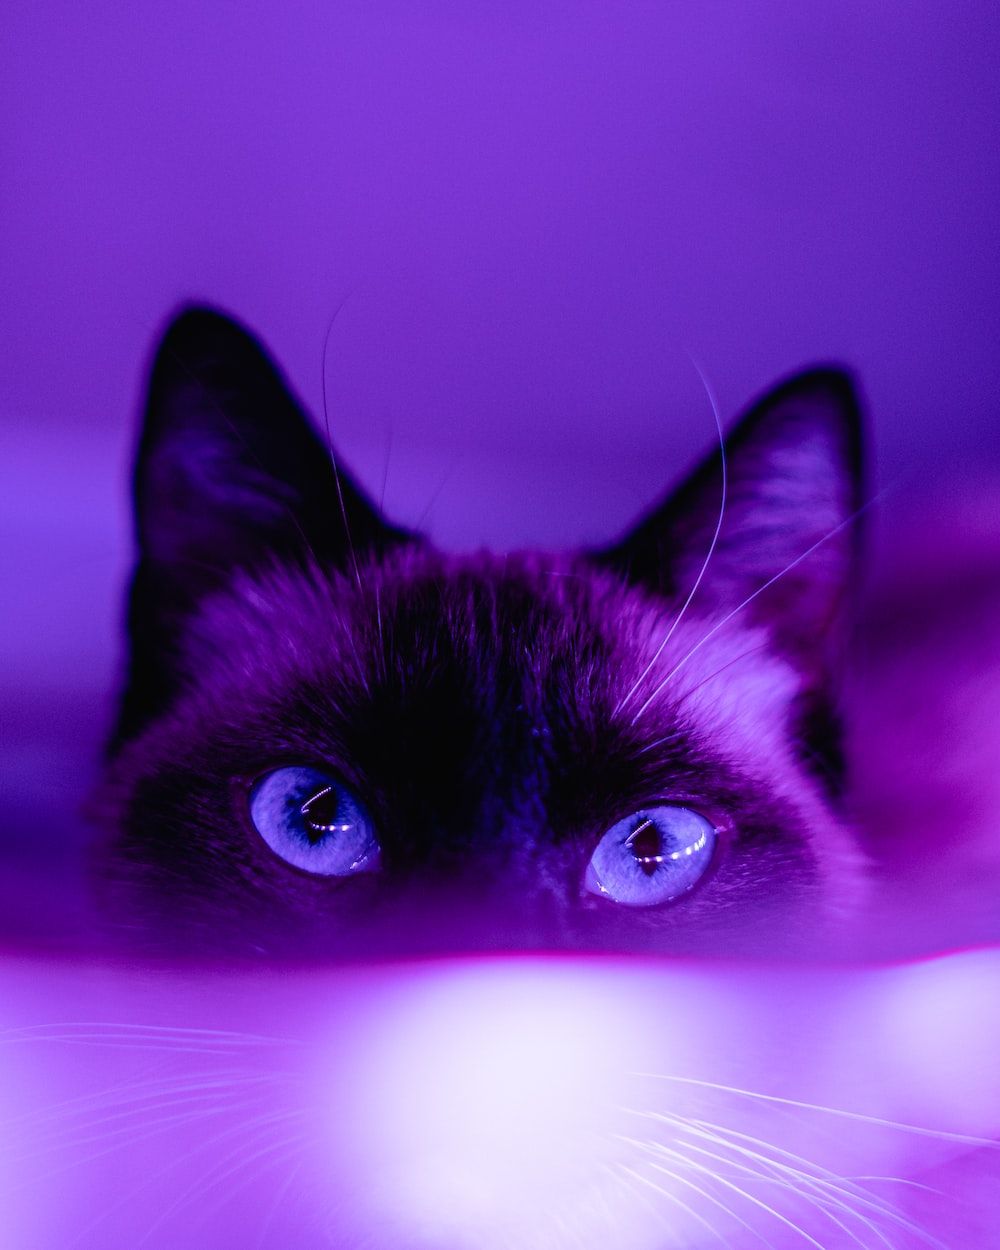 Purple Aesthetic Picture. Download Free Image